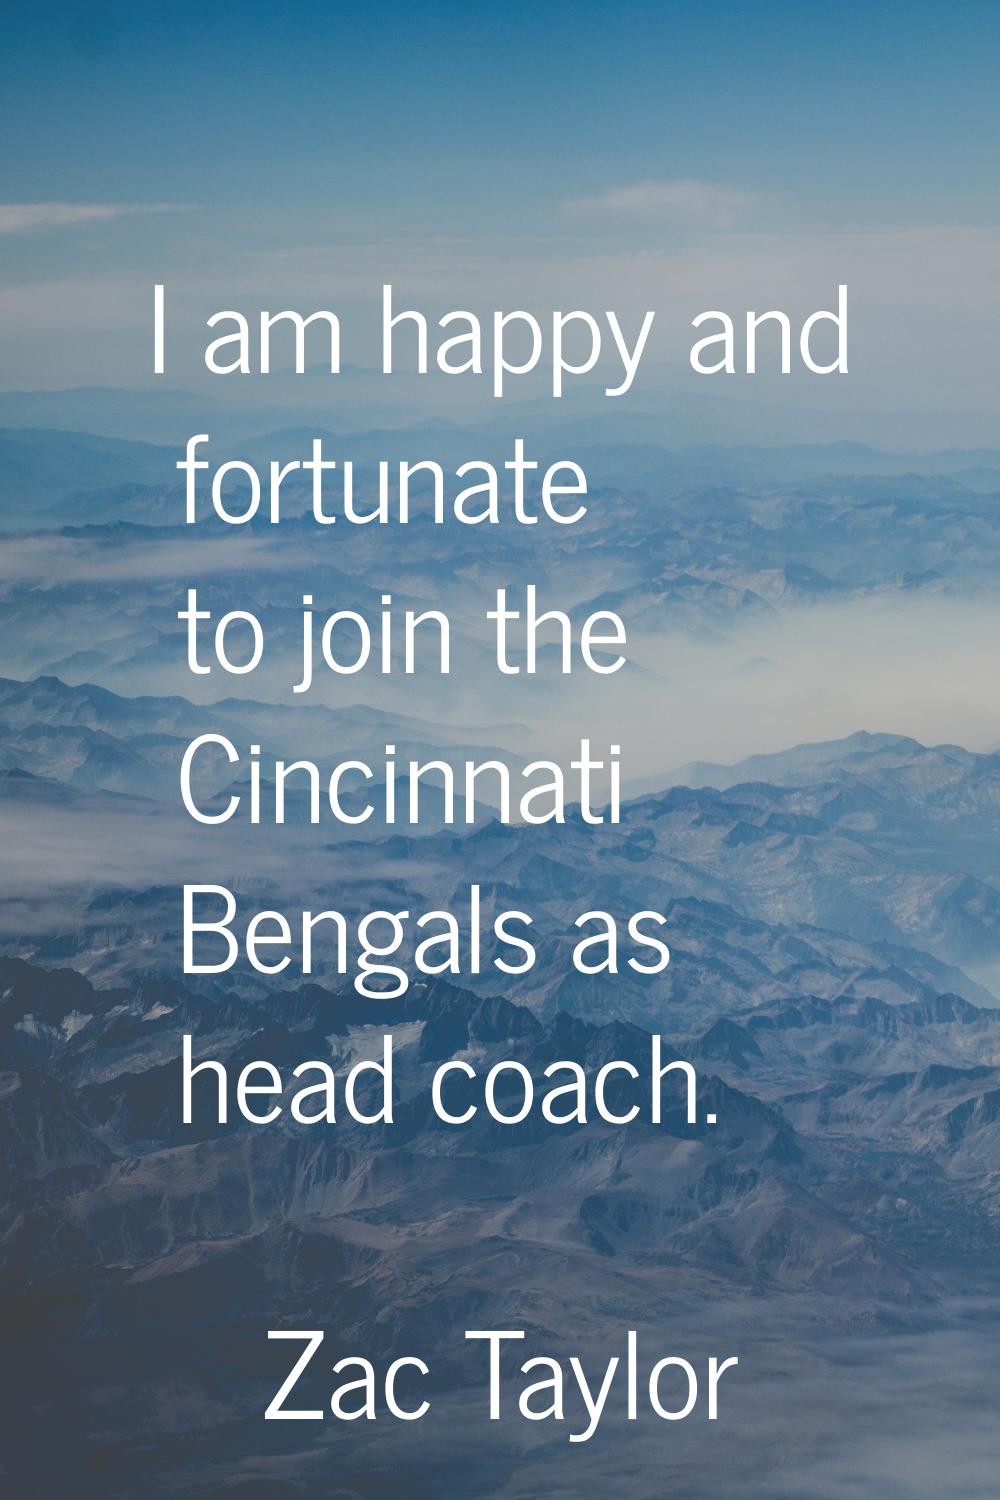 I am happy and fortunate to join the Cincinnati Bengals as head coach.